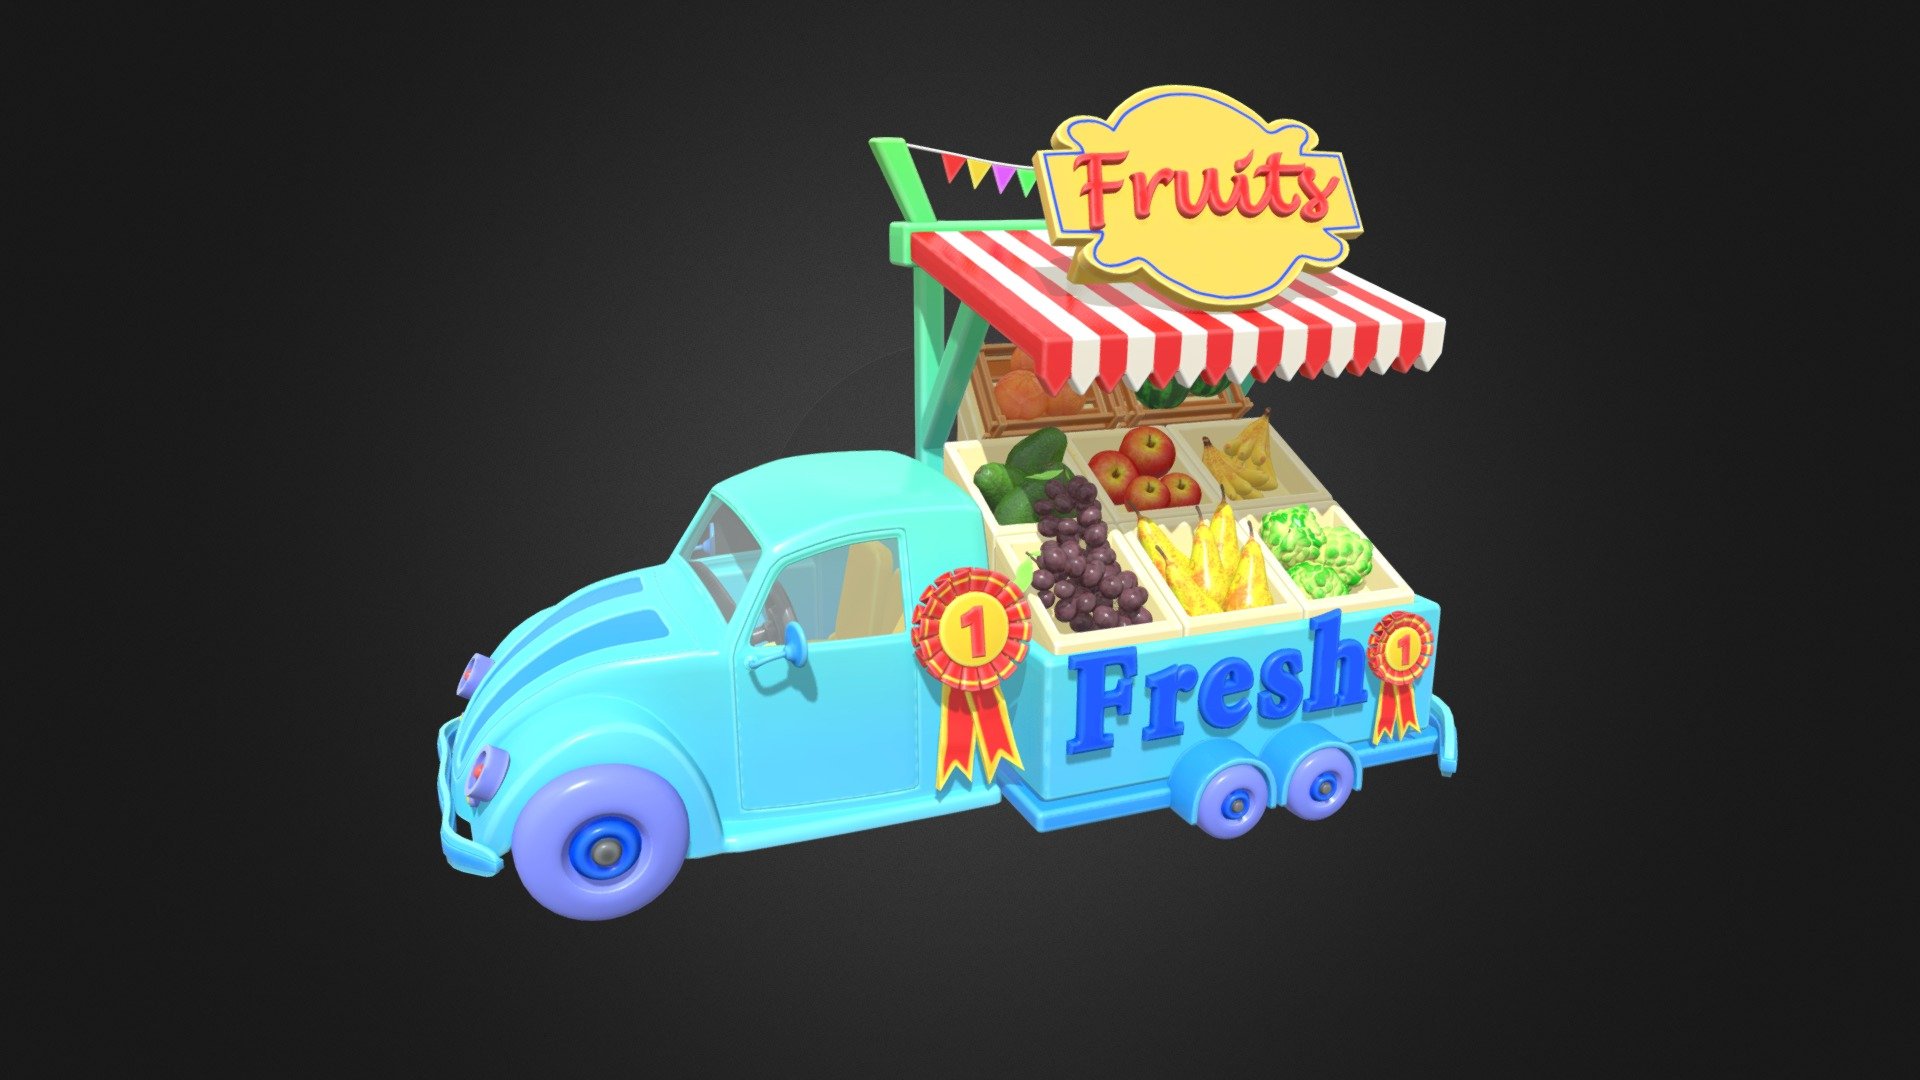 *Description

-3d model of Food Fresh Fruits Car
-This 3D model is best for use in games.
-The model is equipped with all required PBR textures.
-Model is built with great attention to details and realistic proportions with correct geometry.
-Textures are very detailed so it makes this model good enough for close-up.

*Technical details:

-Full PBR textures sets. 
-The model is divided into few manys object.
-Model is completely unwrapped.
-Model is fully textured with all -materials applied.
-Pivot points are correctly placed to suit optional animation process.
-Model scaled to approximate real world size (centimeters).
-All nodes, materials and textures are appropriately named.

*Available file formats:

-Maya files and example render scenes.(packed and regular-unpacked)
-Maya (.ma)
-3ds Max 2018 (.max)
-Autodesk FBX (.fbx)
-OBJ (.obj)

*Additional Info:

-This model is not intended for 3D printing 3d model